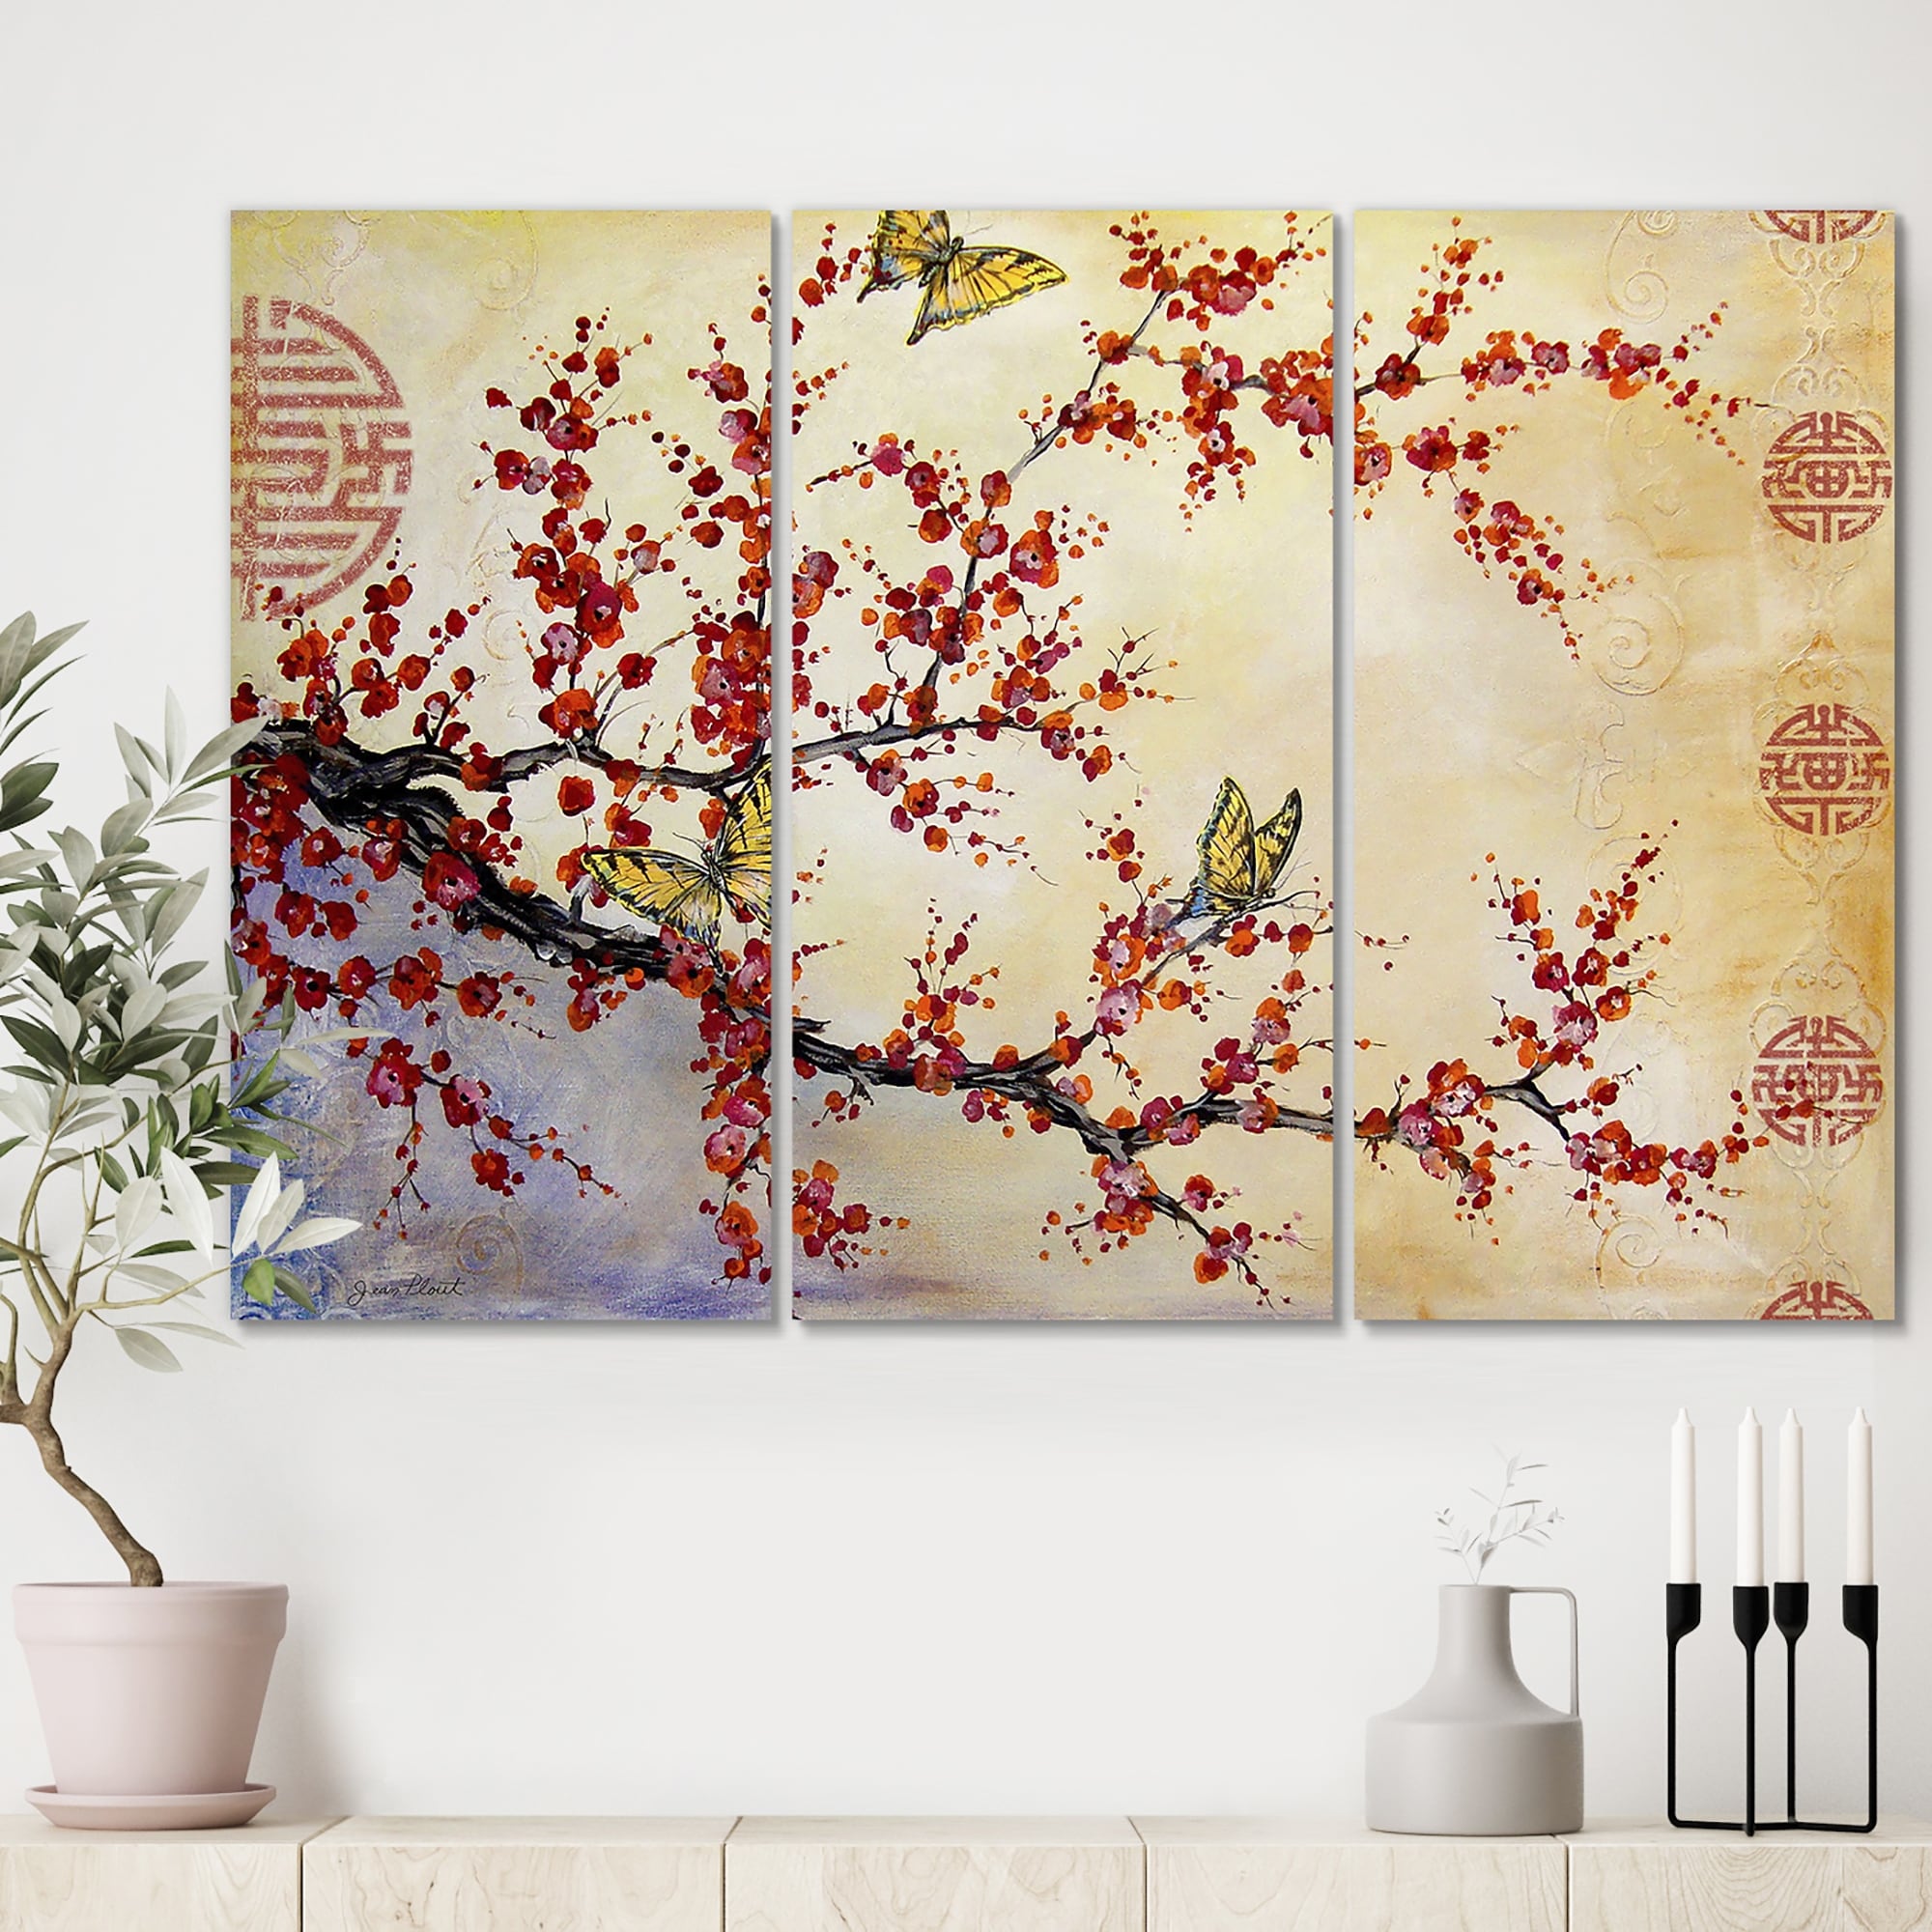 SUPERB JAPANESE GARDEN LANDSCAPE CANVAS #304 QUALITY FRAMED WALL ART PICTURE A1 